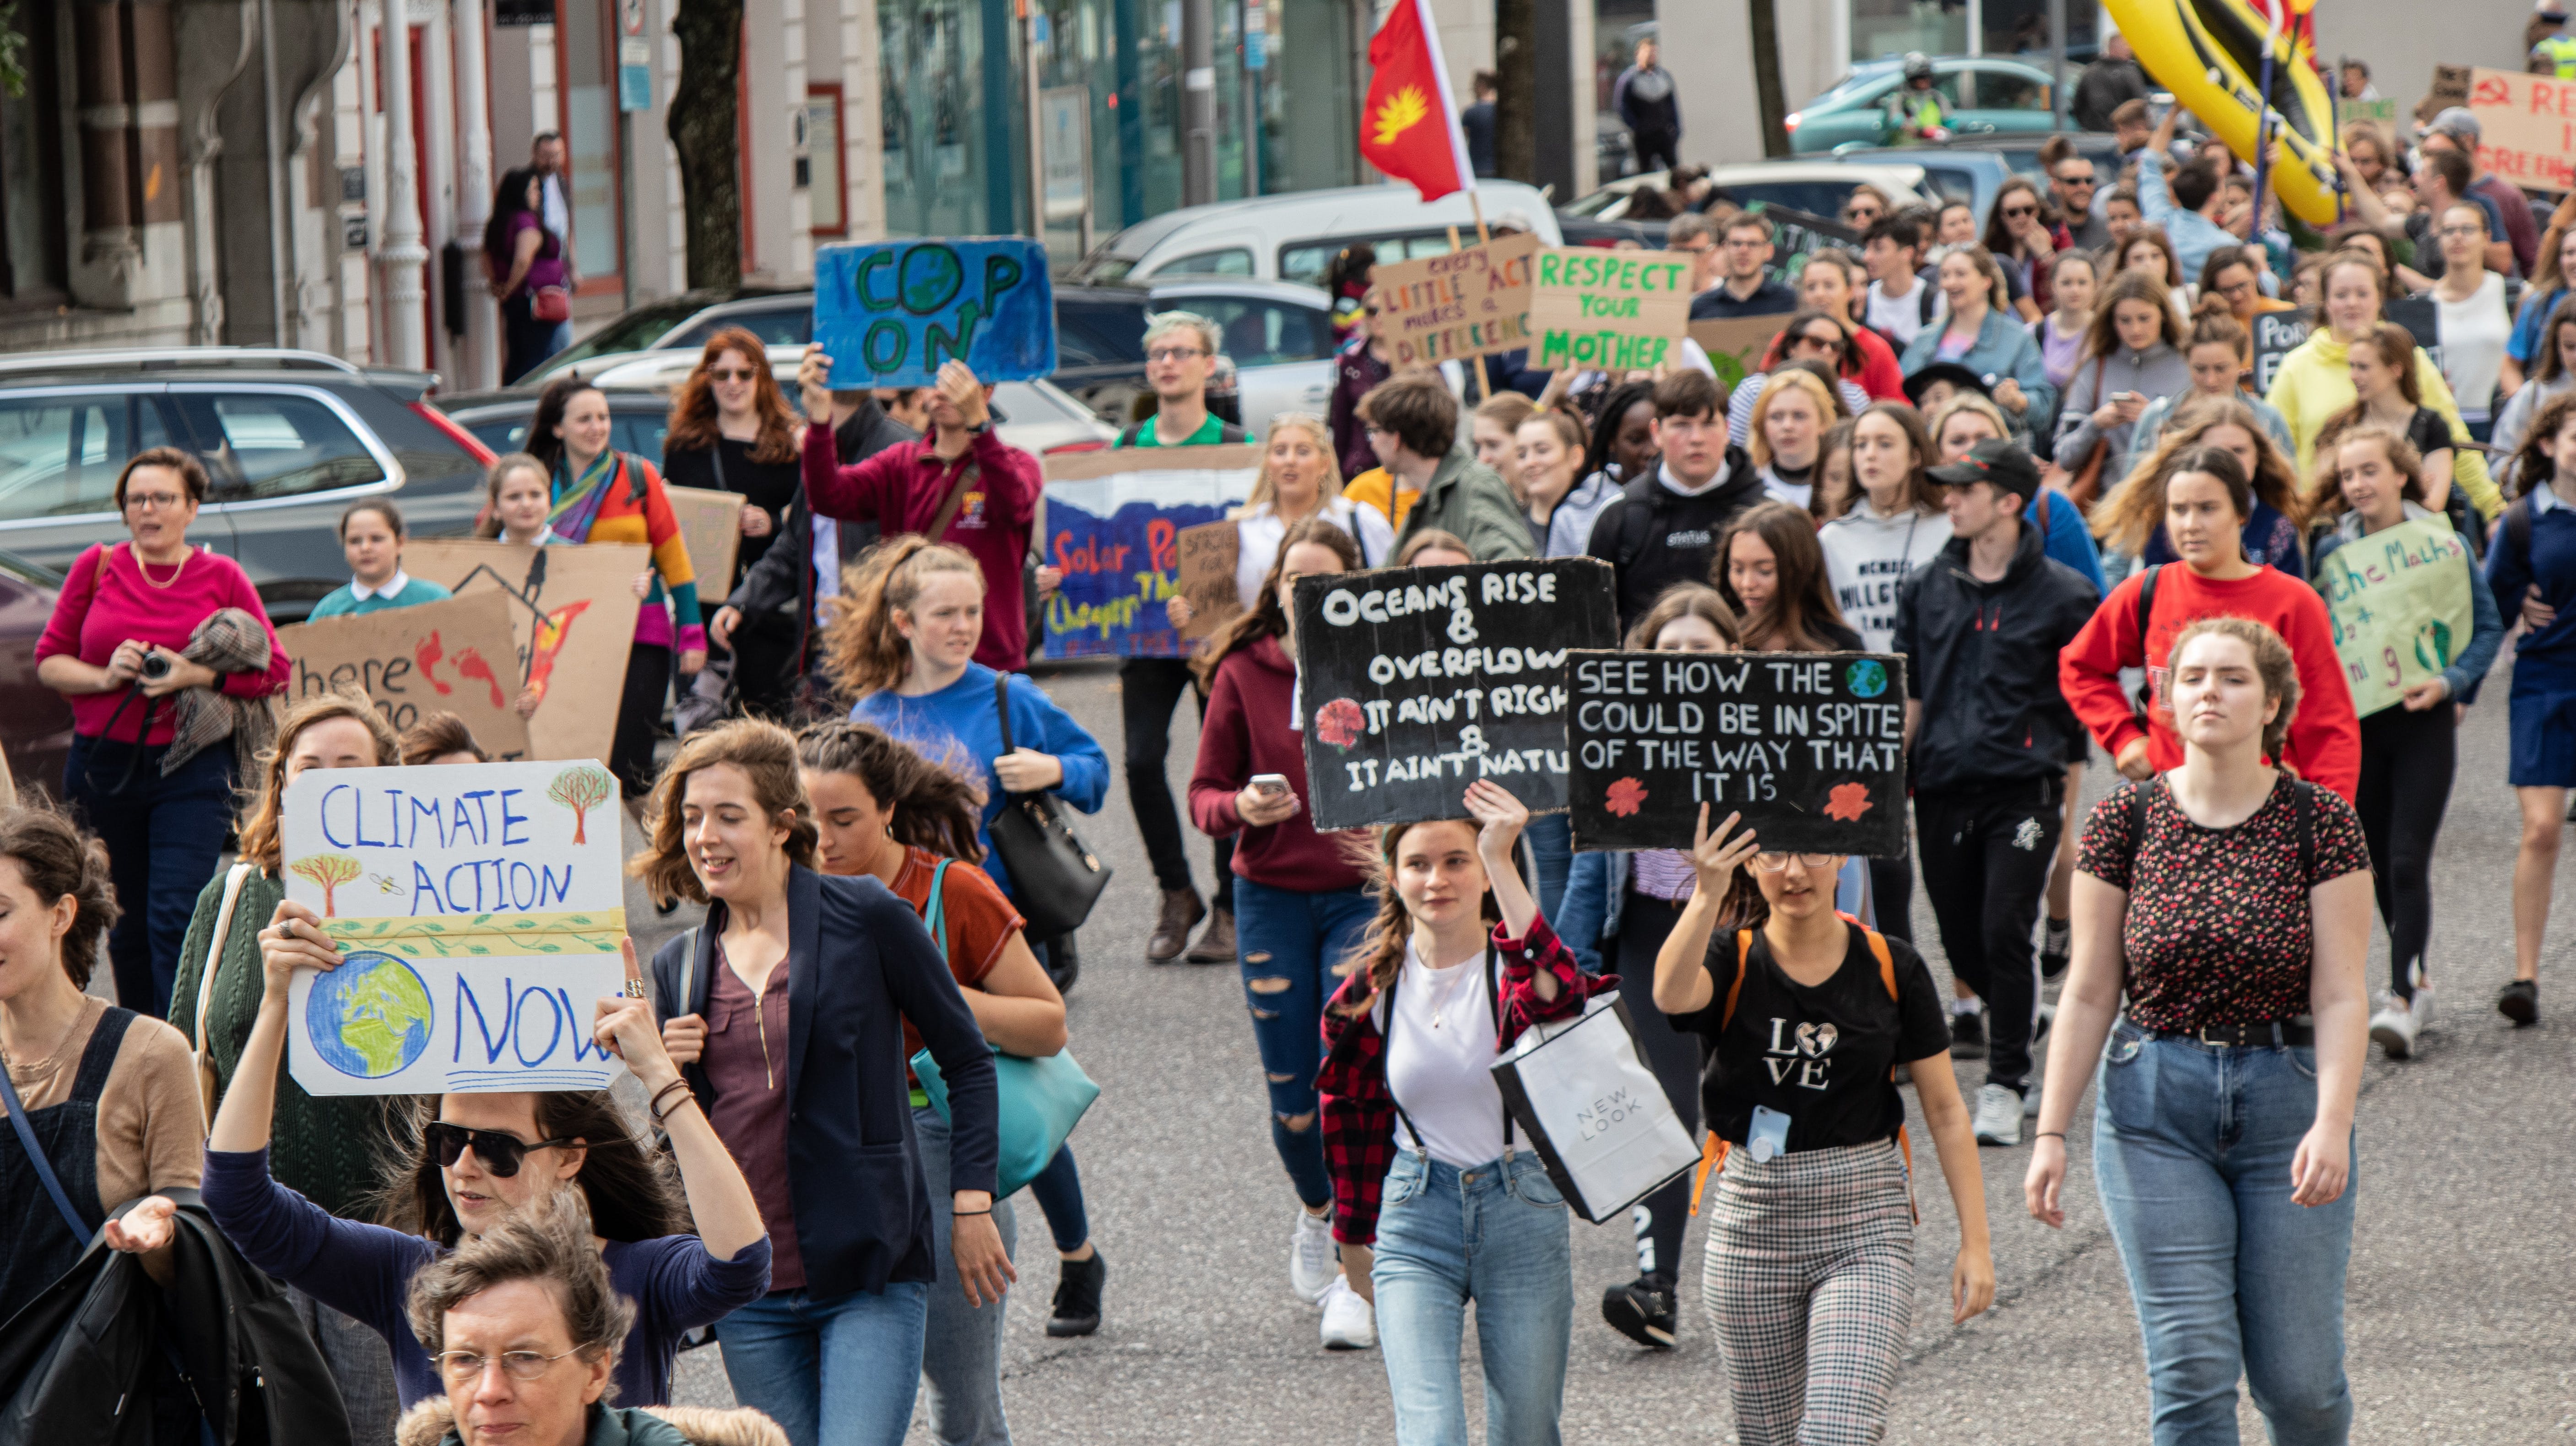 People marching in a climate change rally.